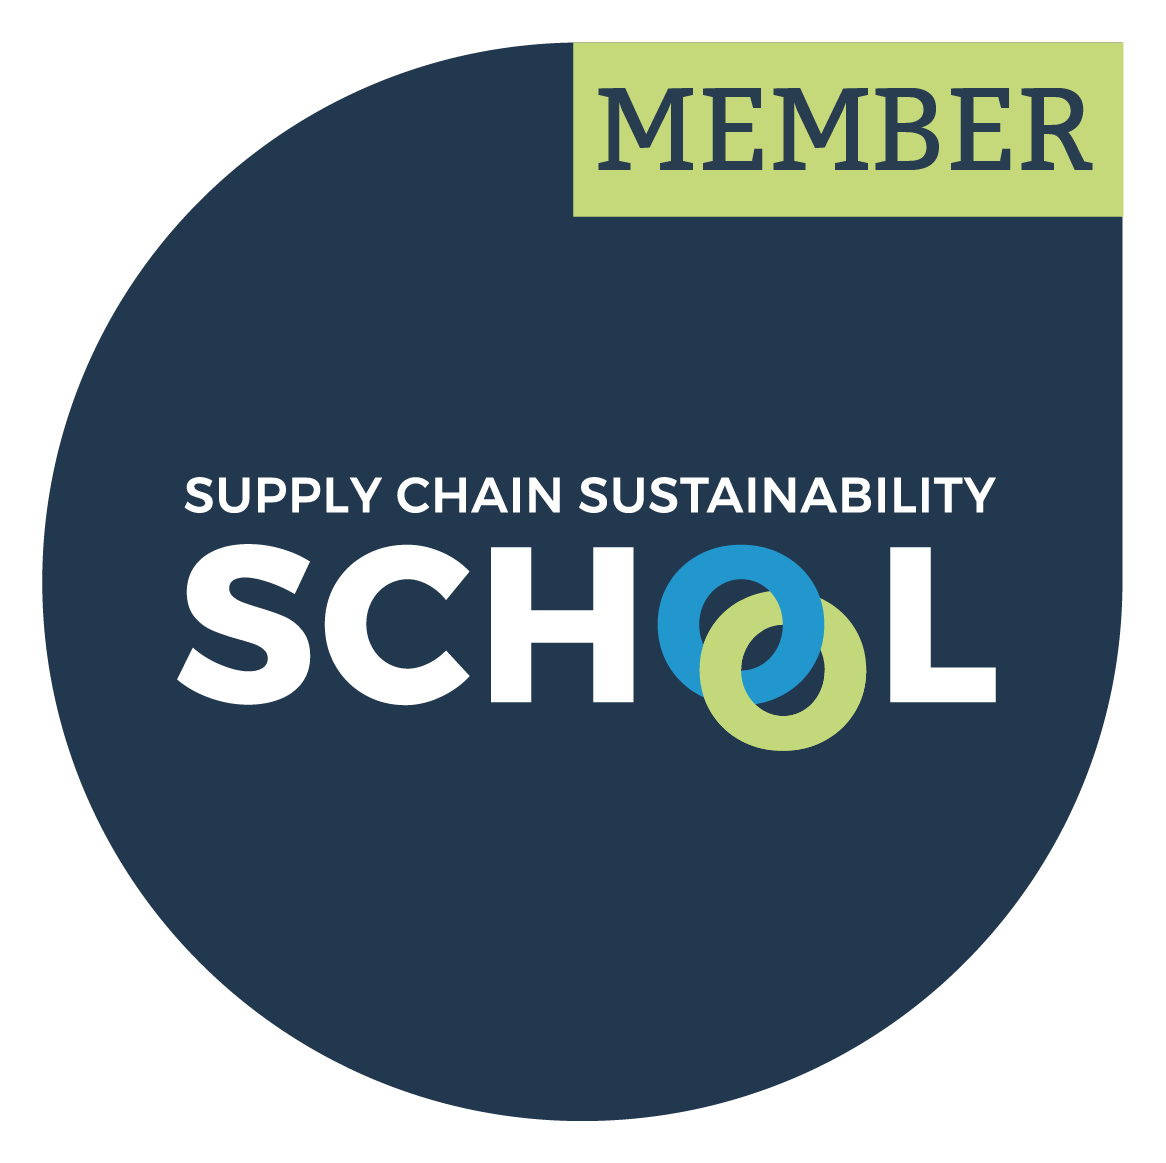 Member of the Supply Chain Sustainability School